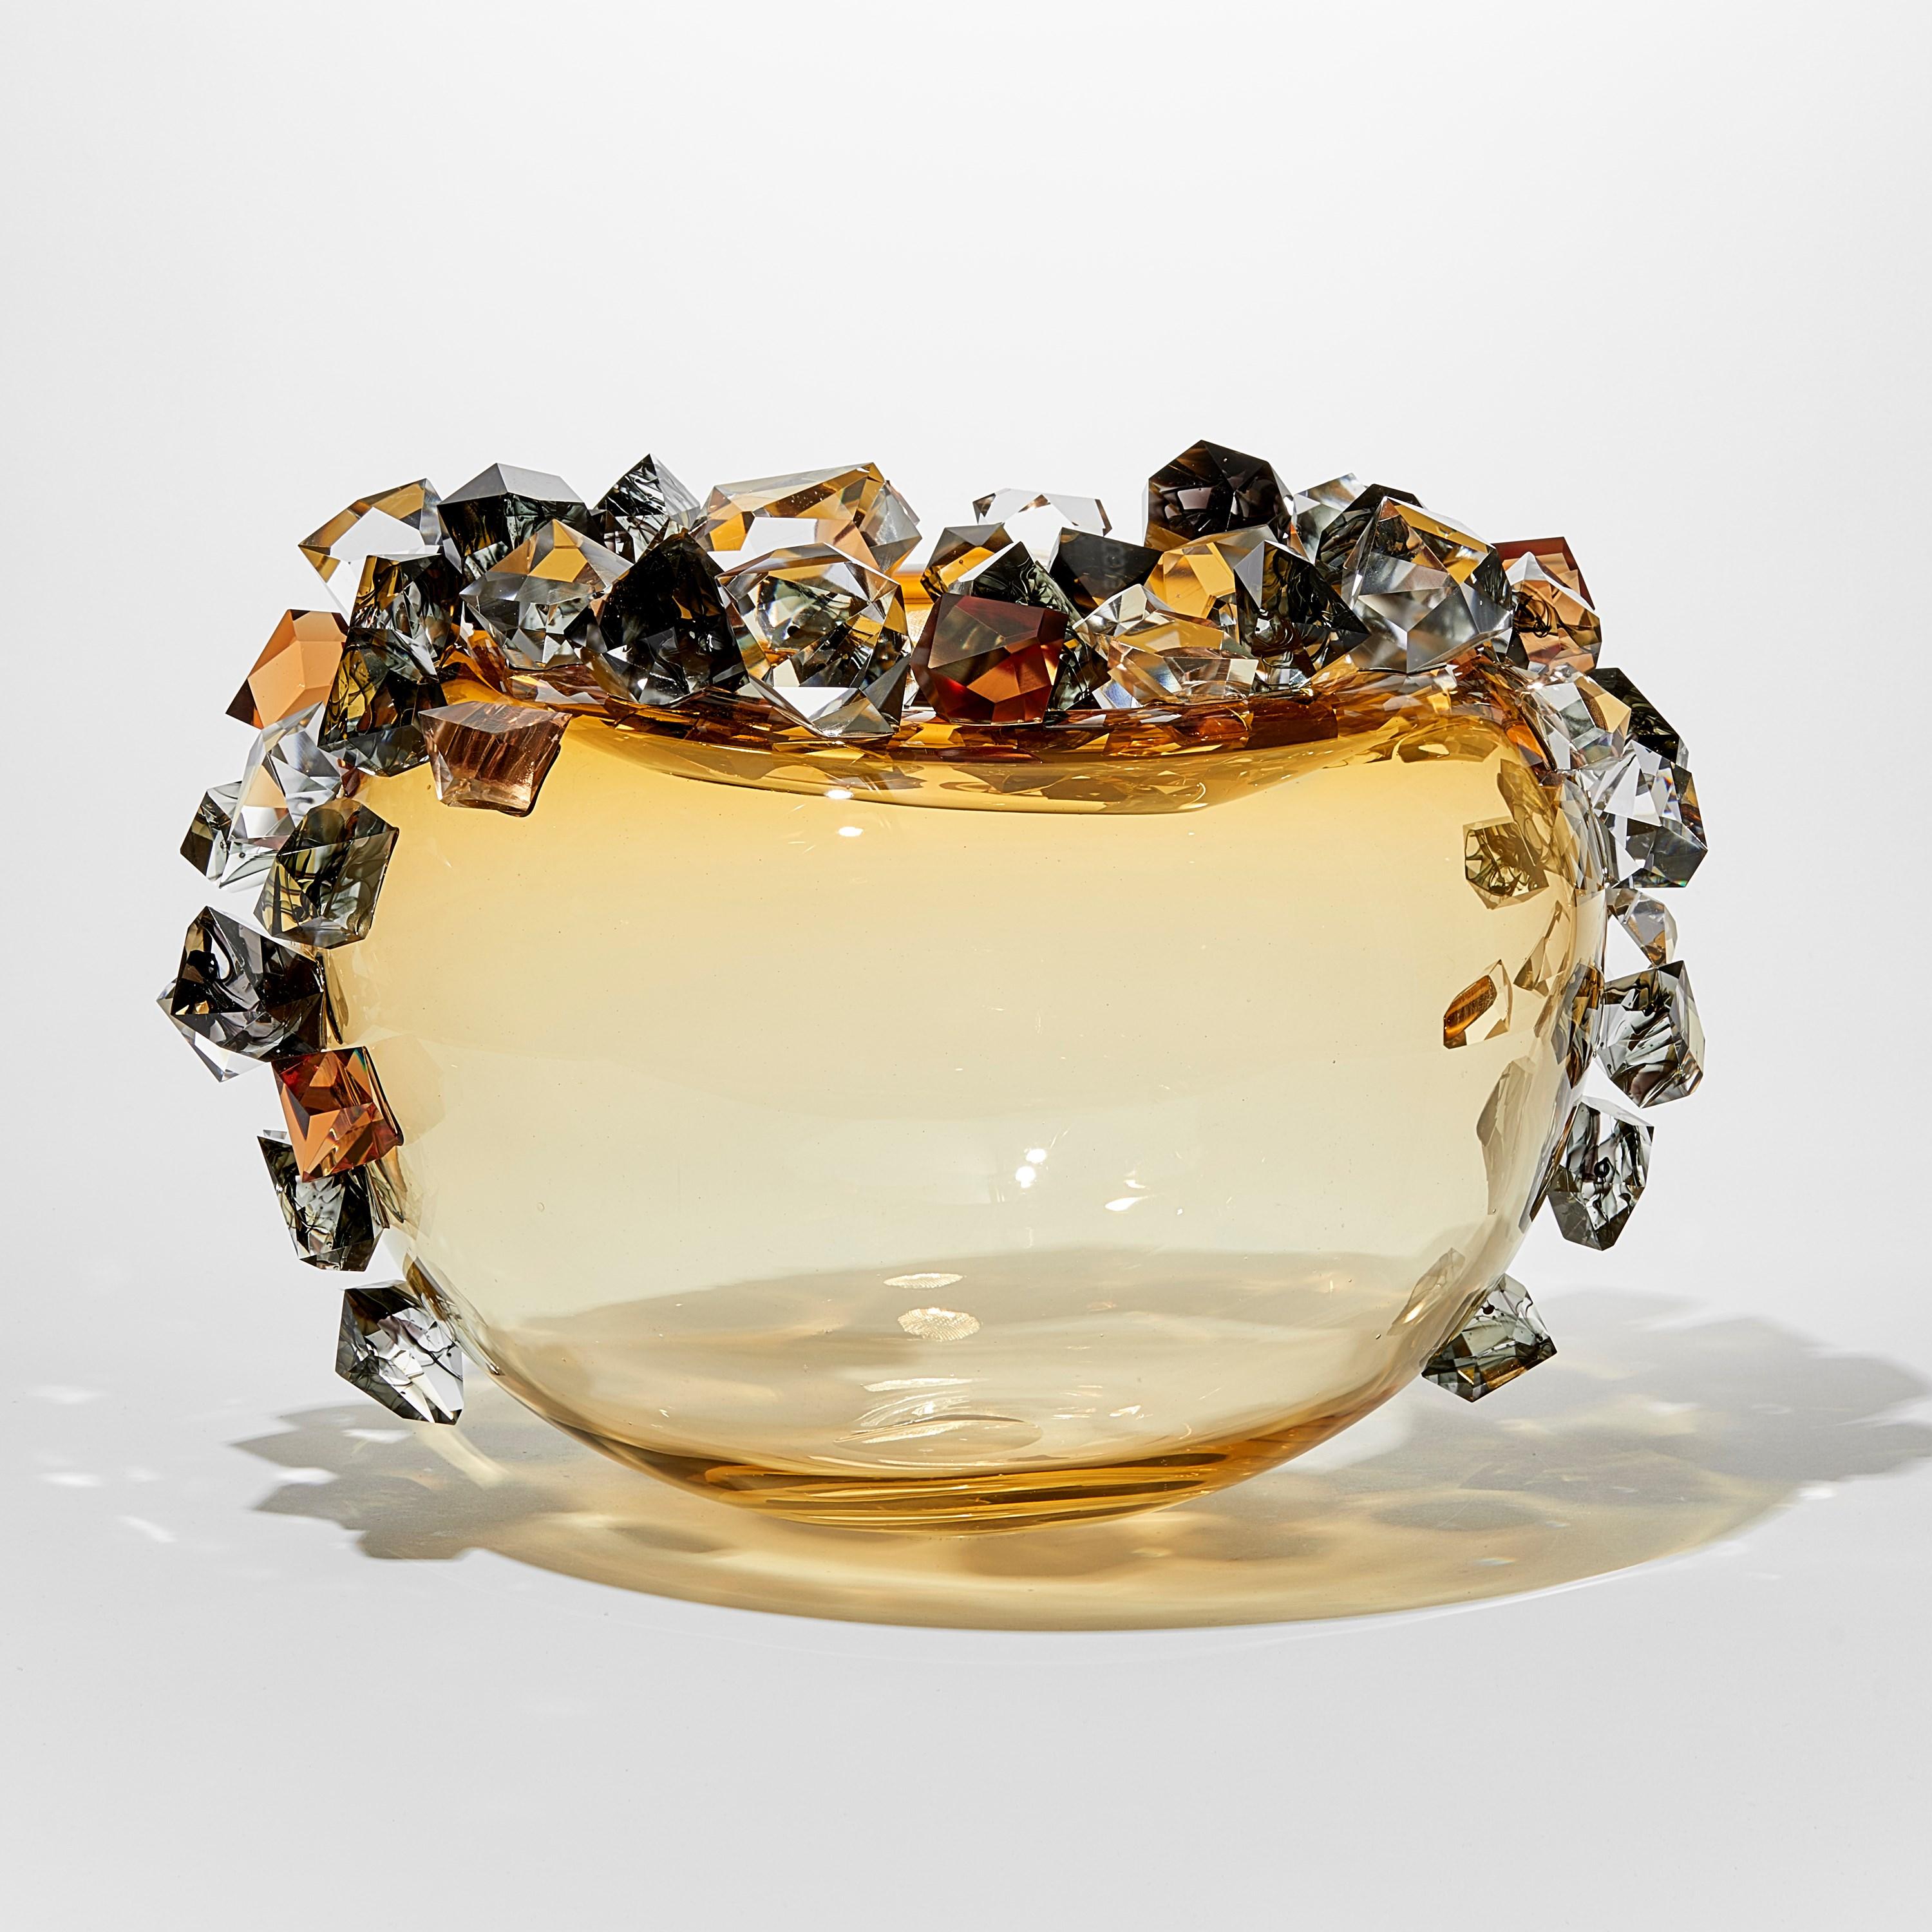 Cristal Diffusion in Amber, crystal adorned glass sculpture by Hanne Enemark In New Condition For Sale In London, GB